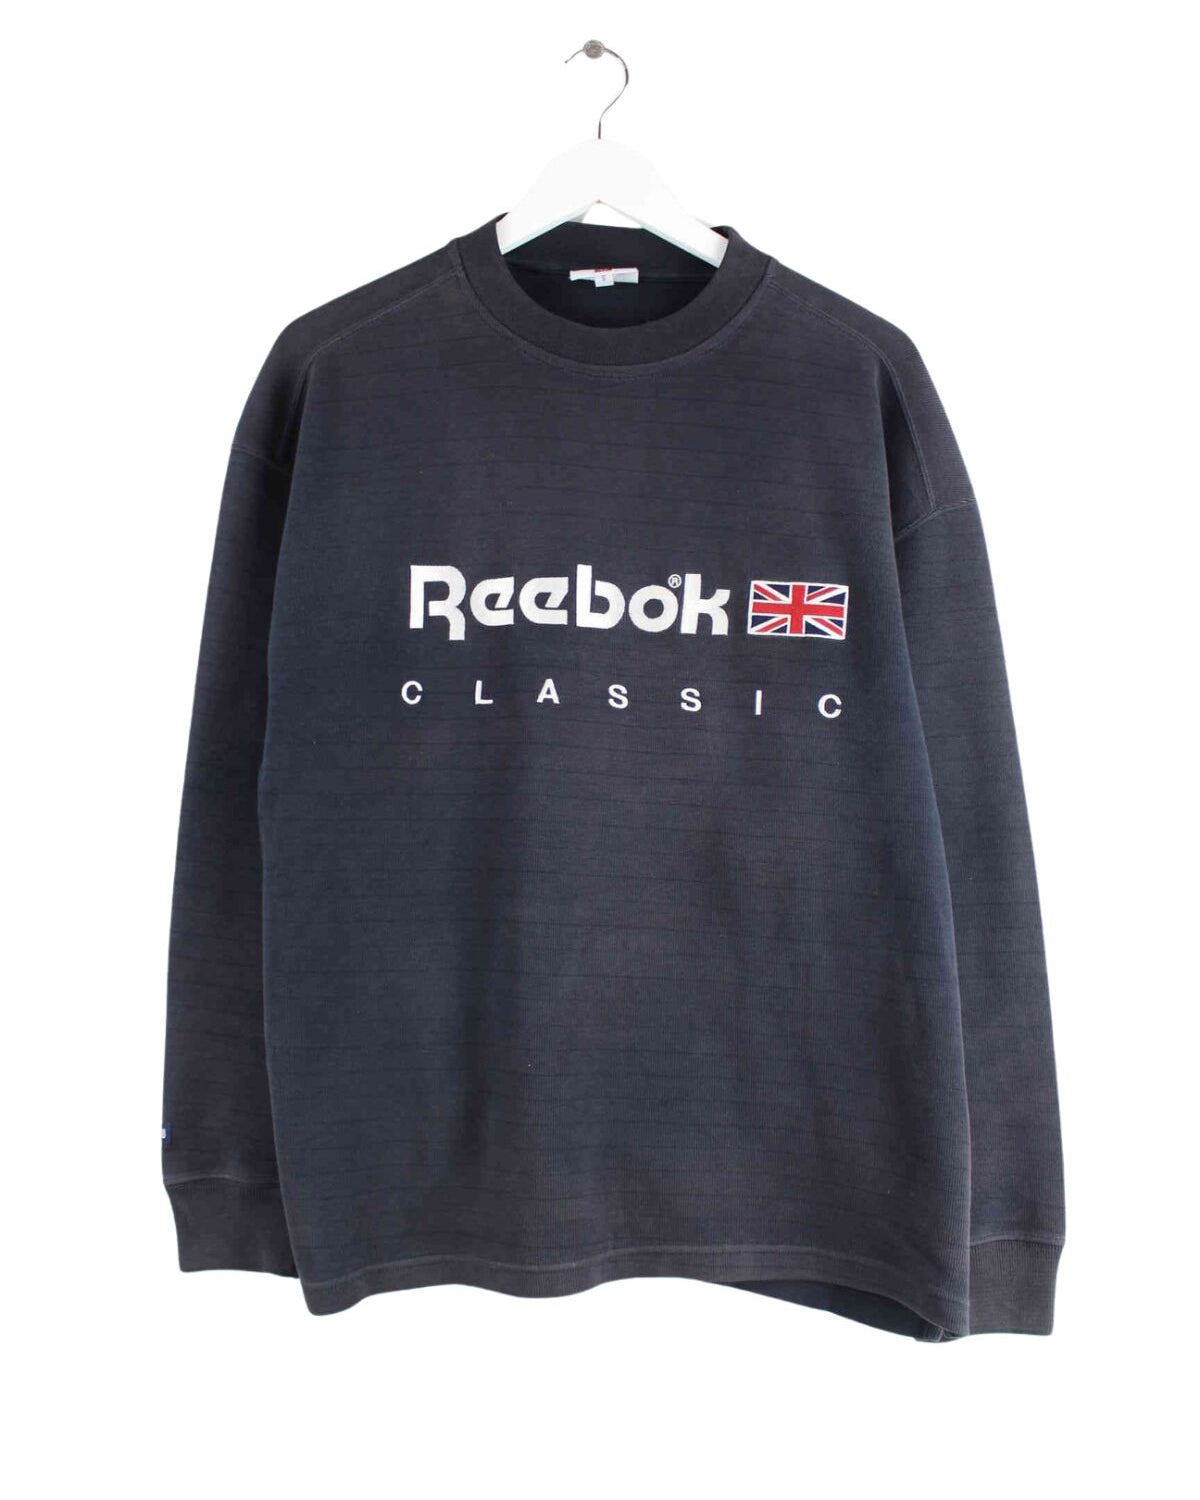 Reebok Embroidered Sweater Schwarz S (front image)